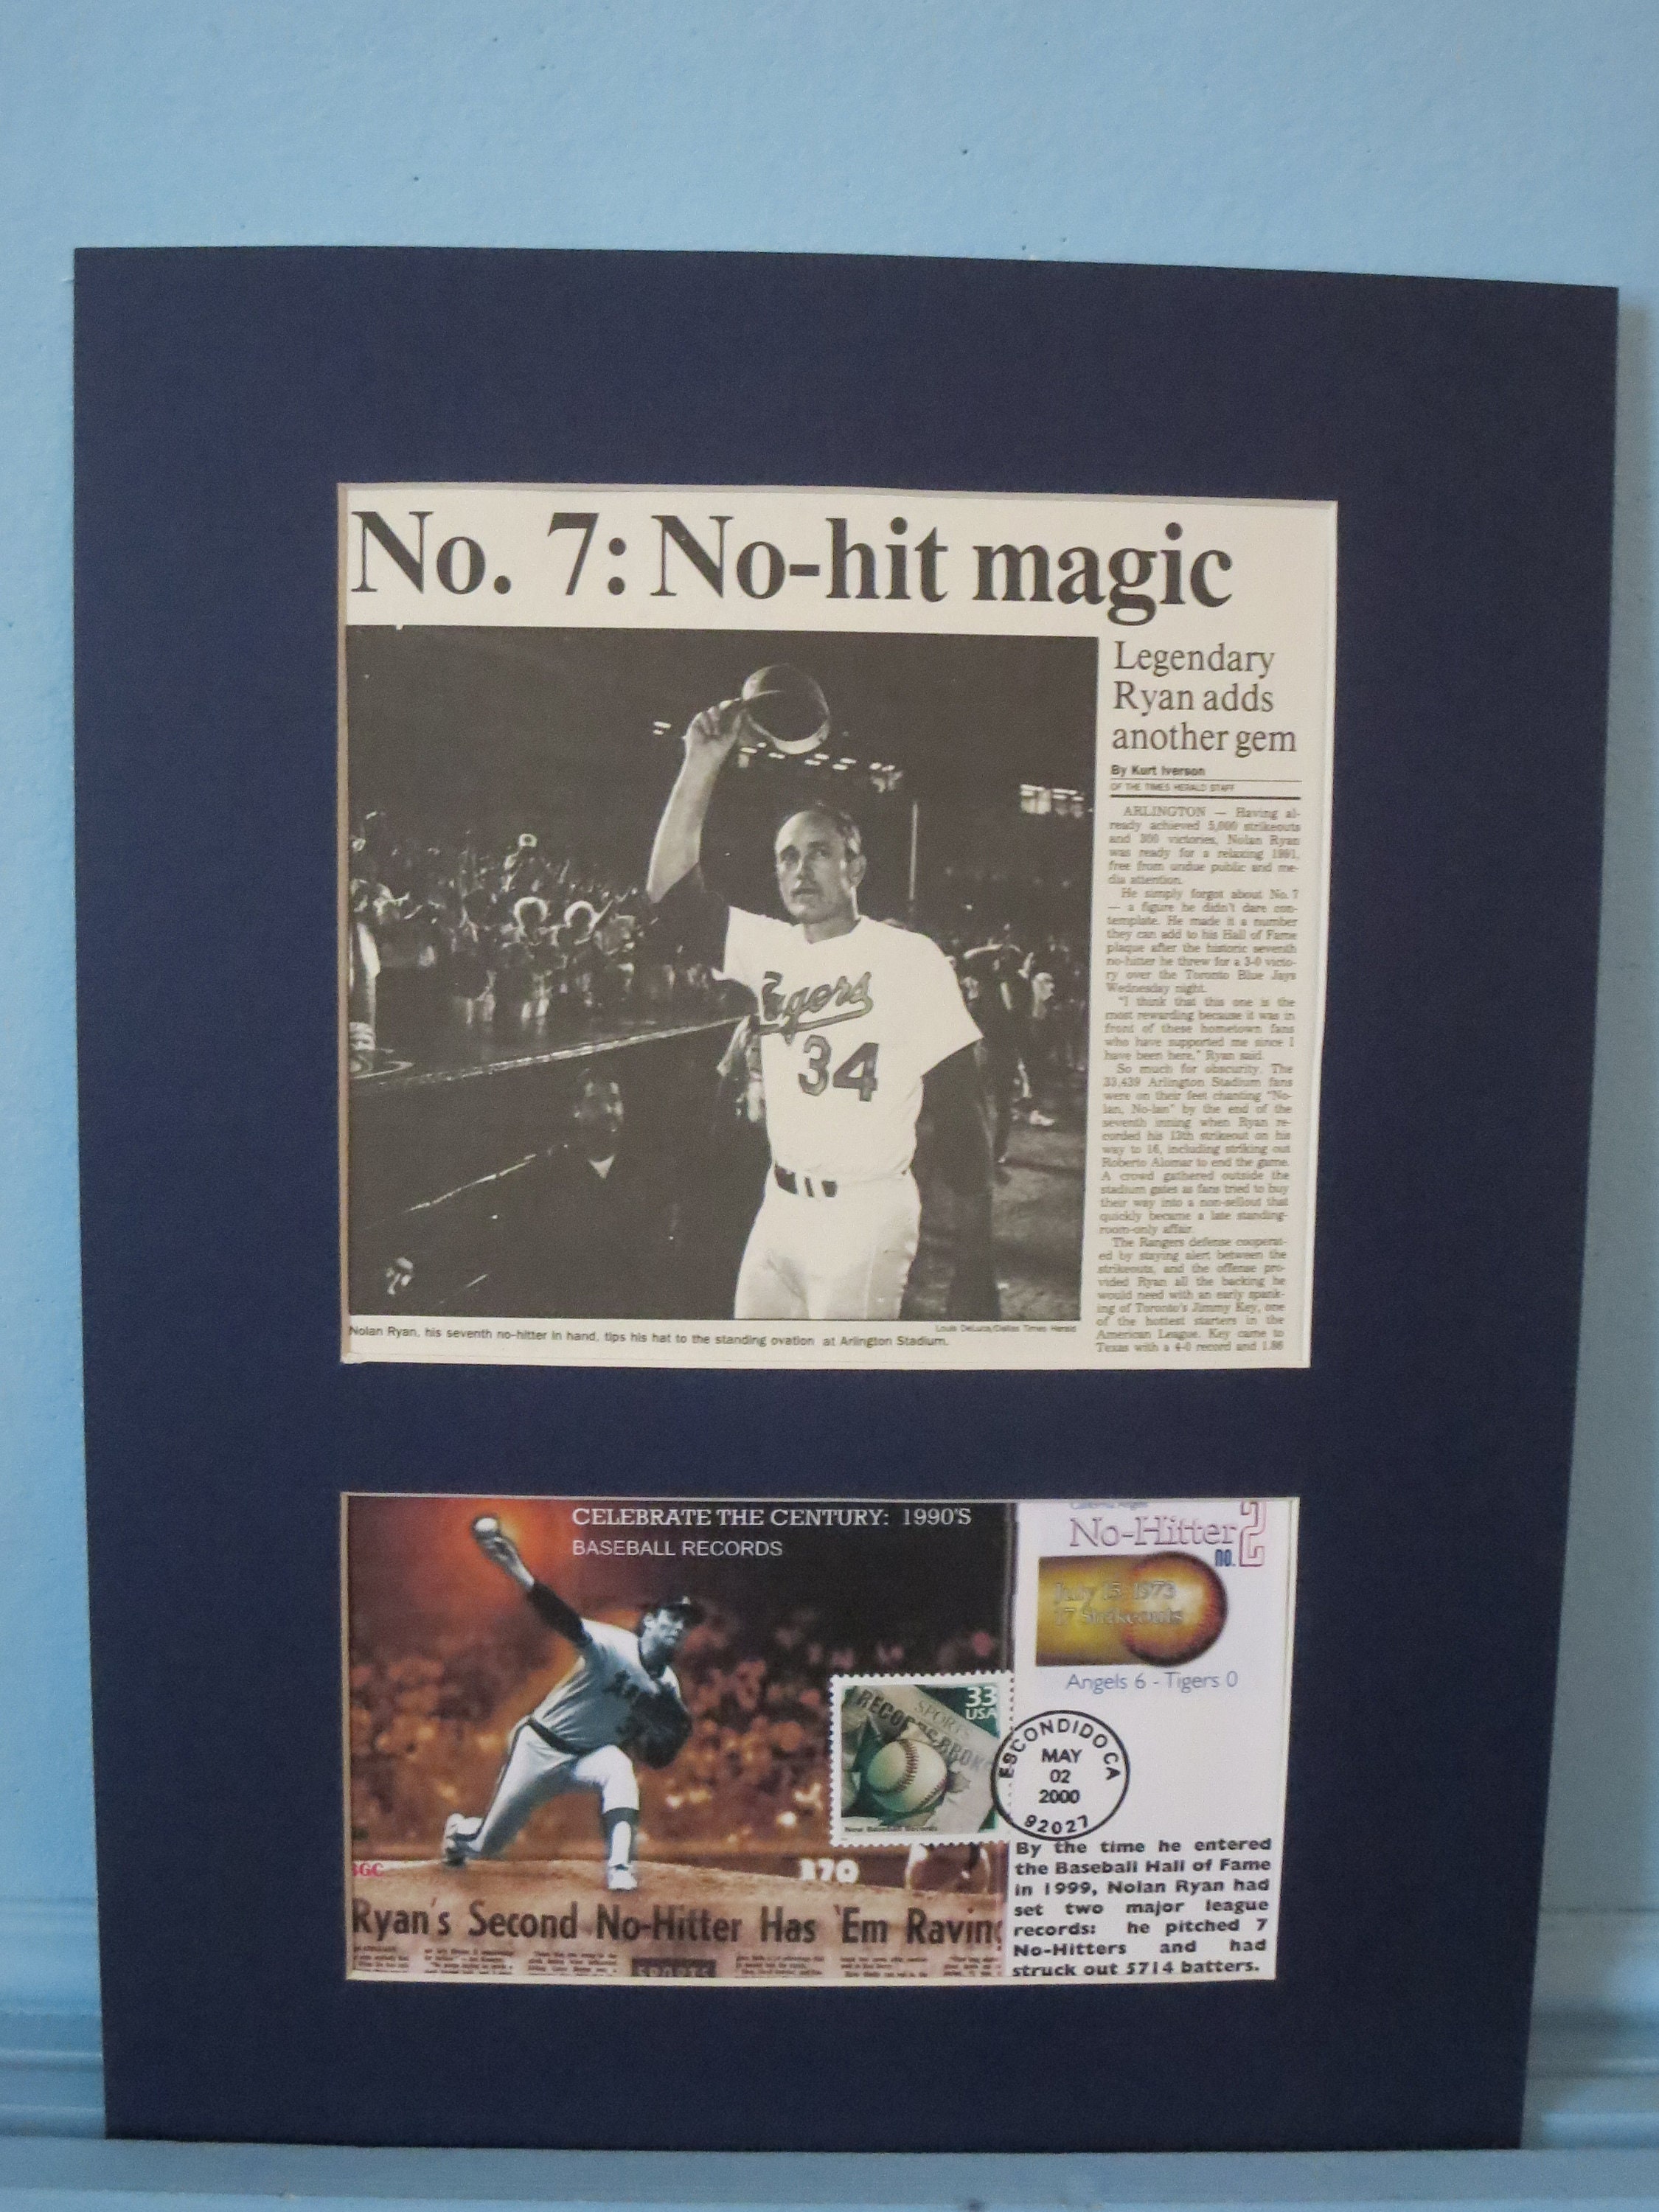 The world's largest collection of Nolan Ryan memorabilia finds a